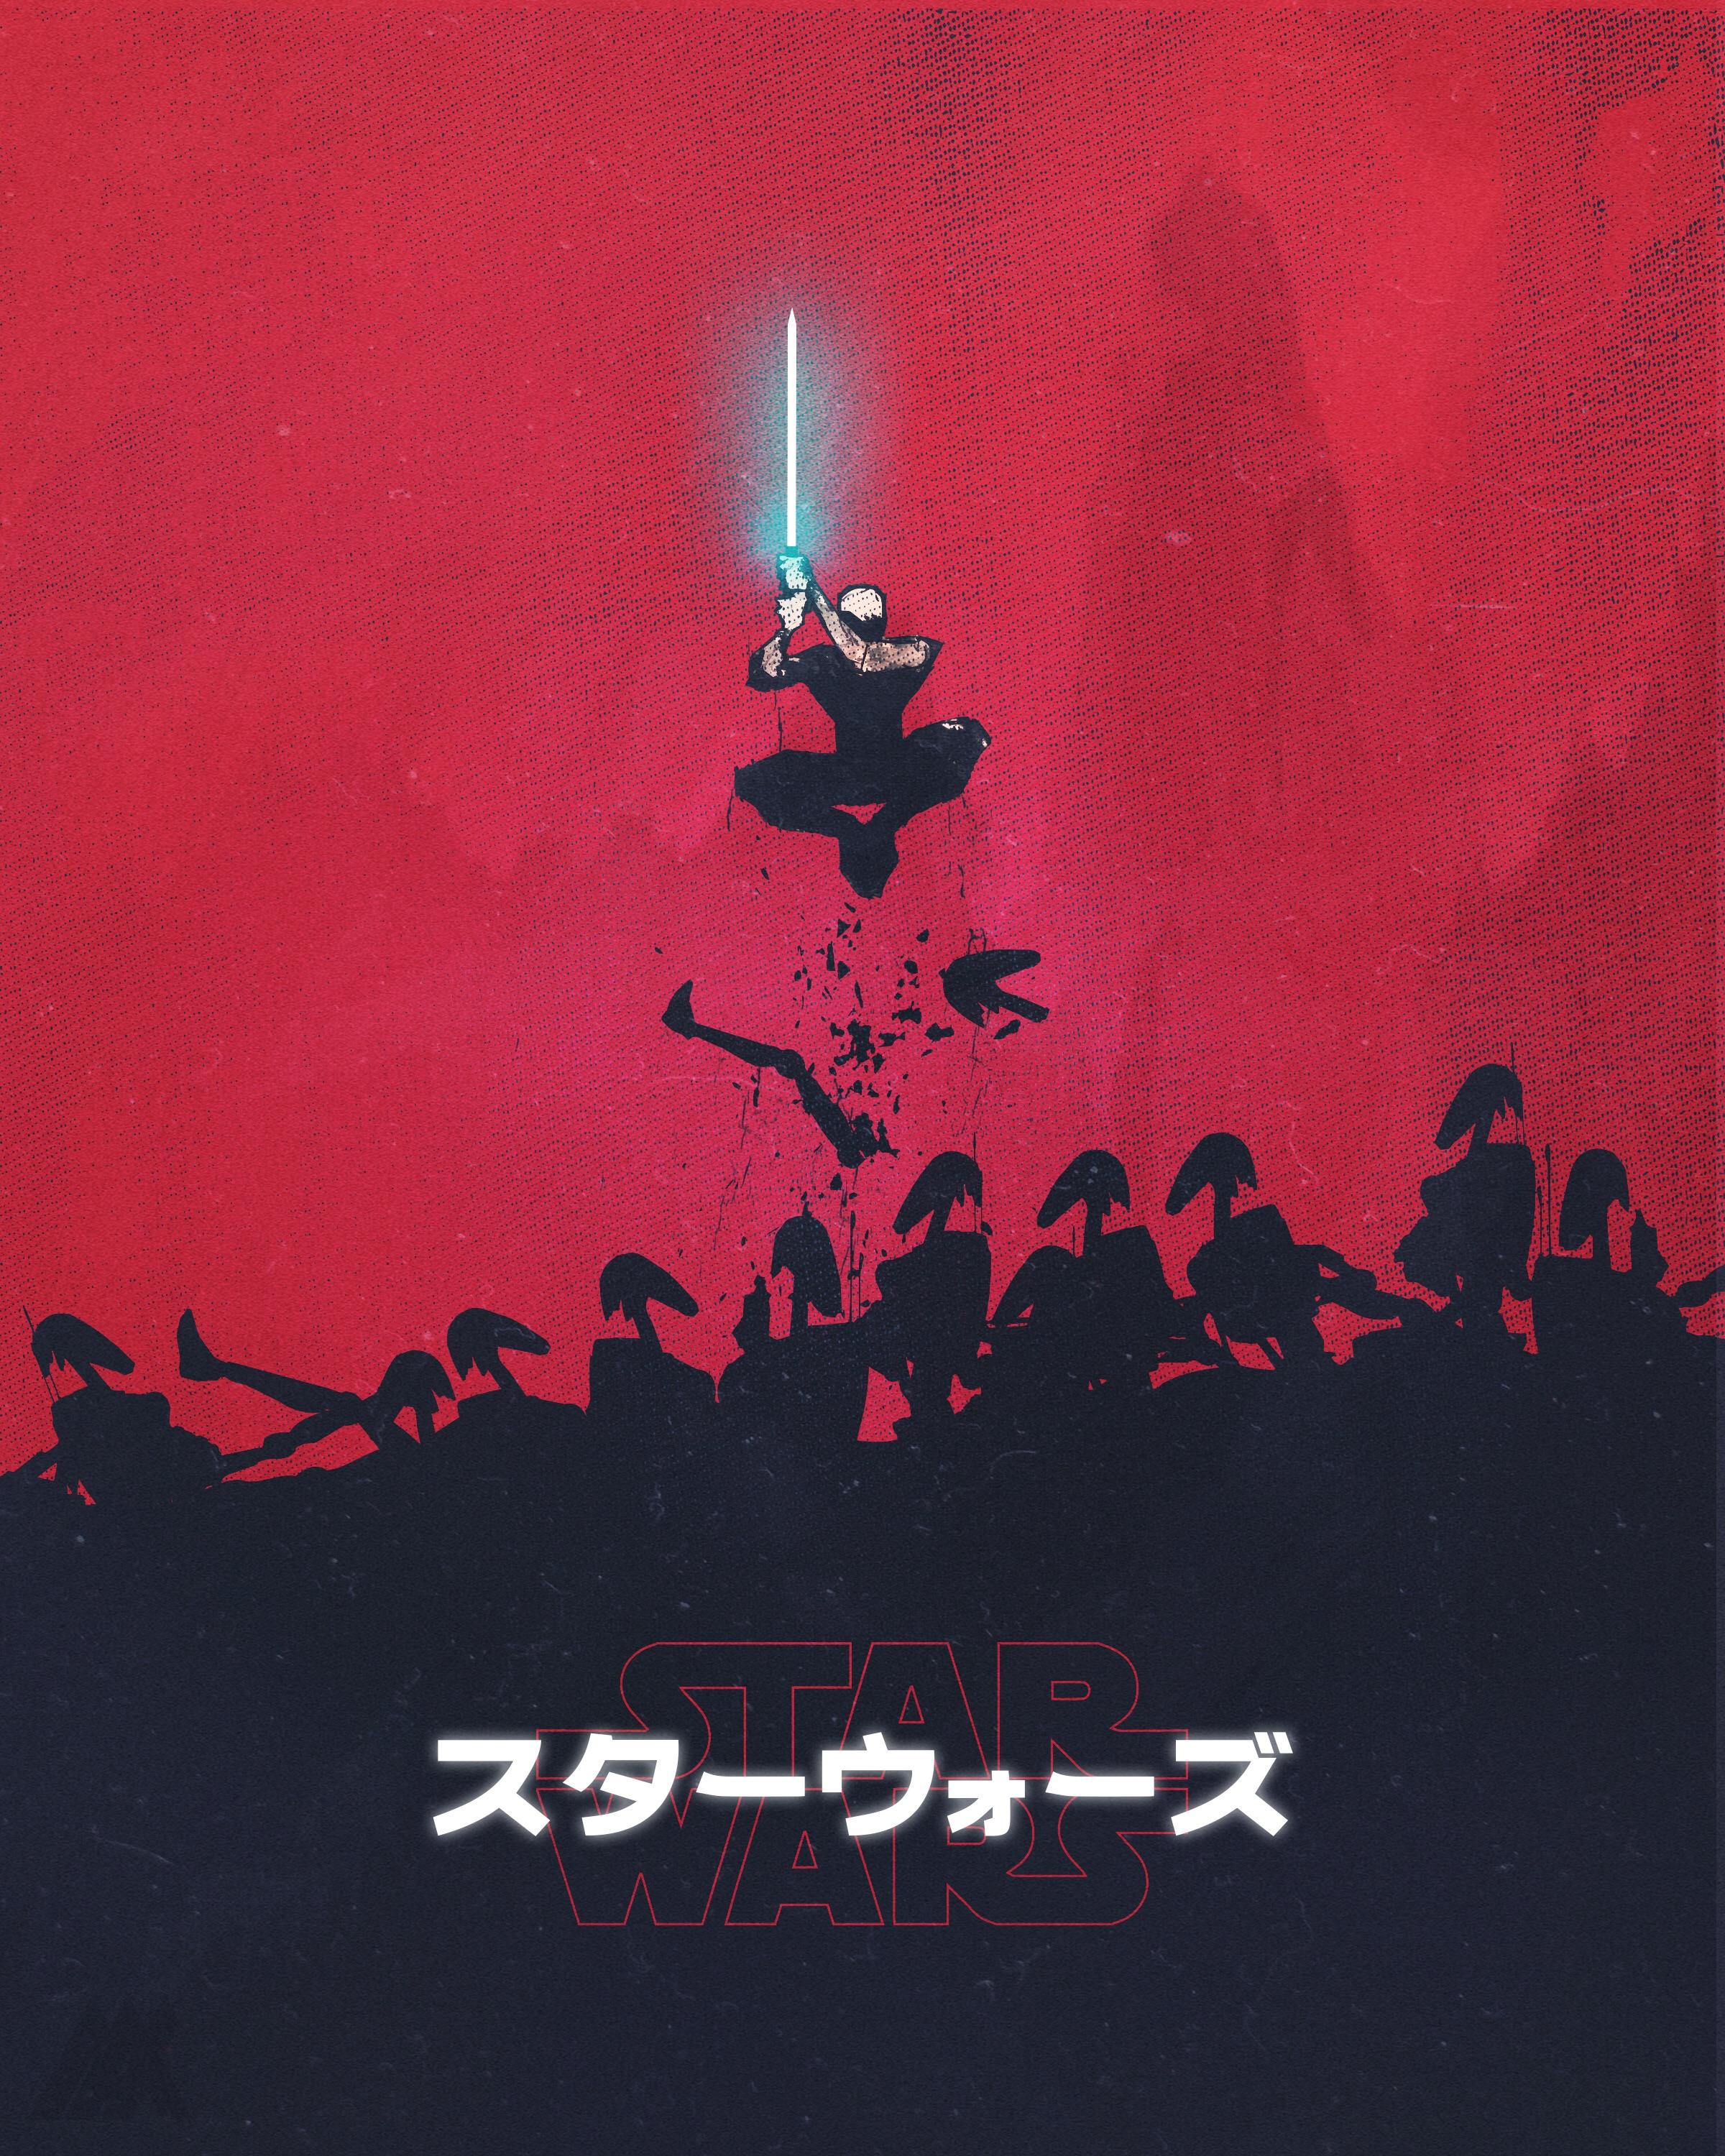 I've been really into some Japanese vibes with my art lately, so of course I did something Star Wars. Enjoy!: StarWars